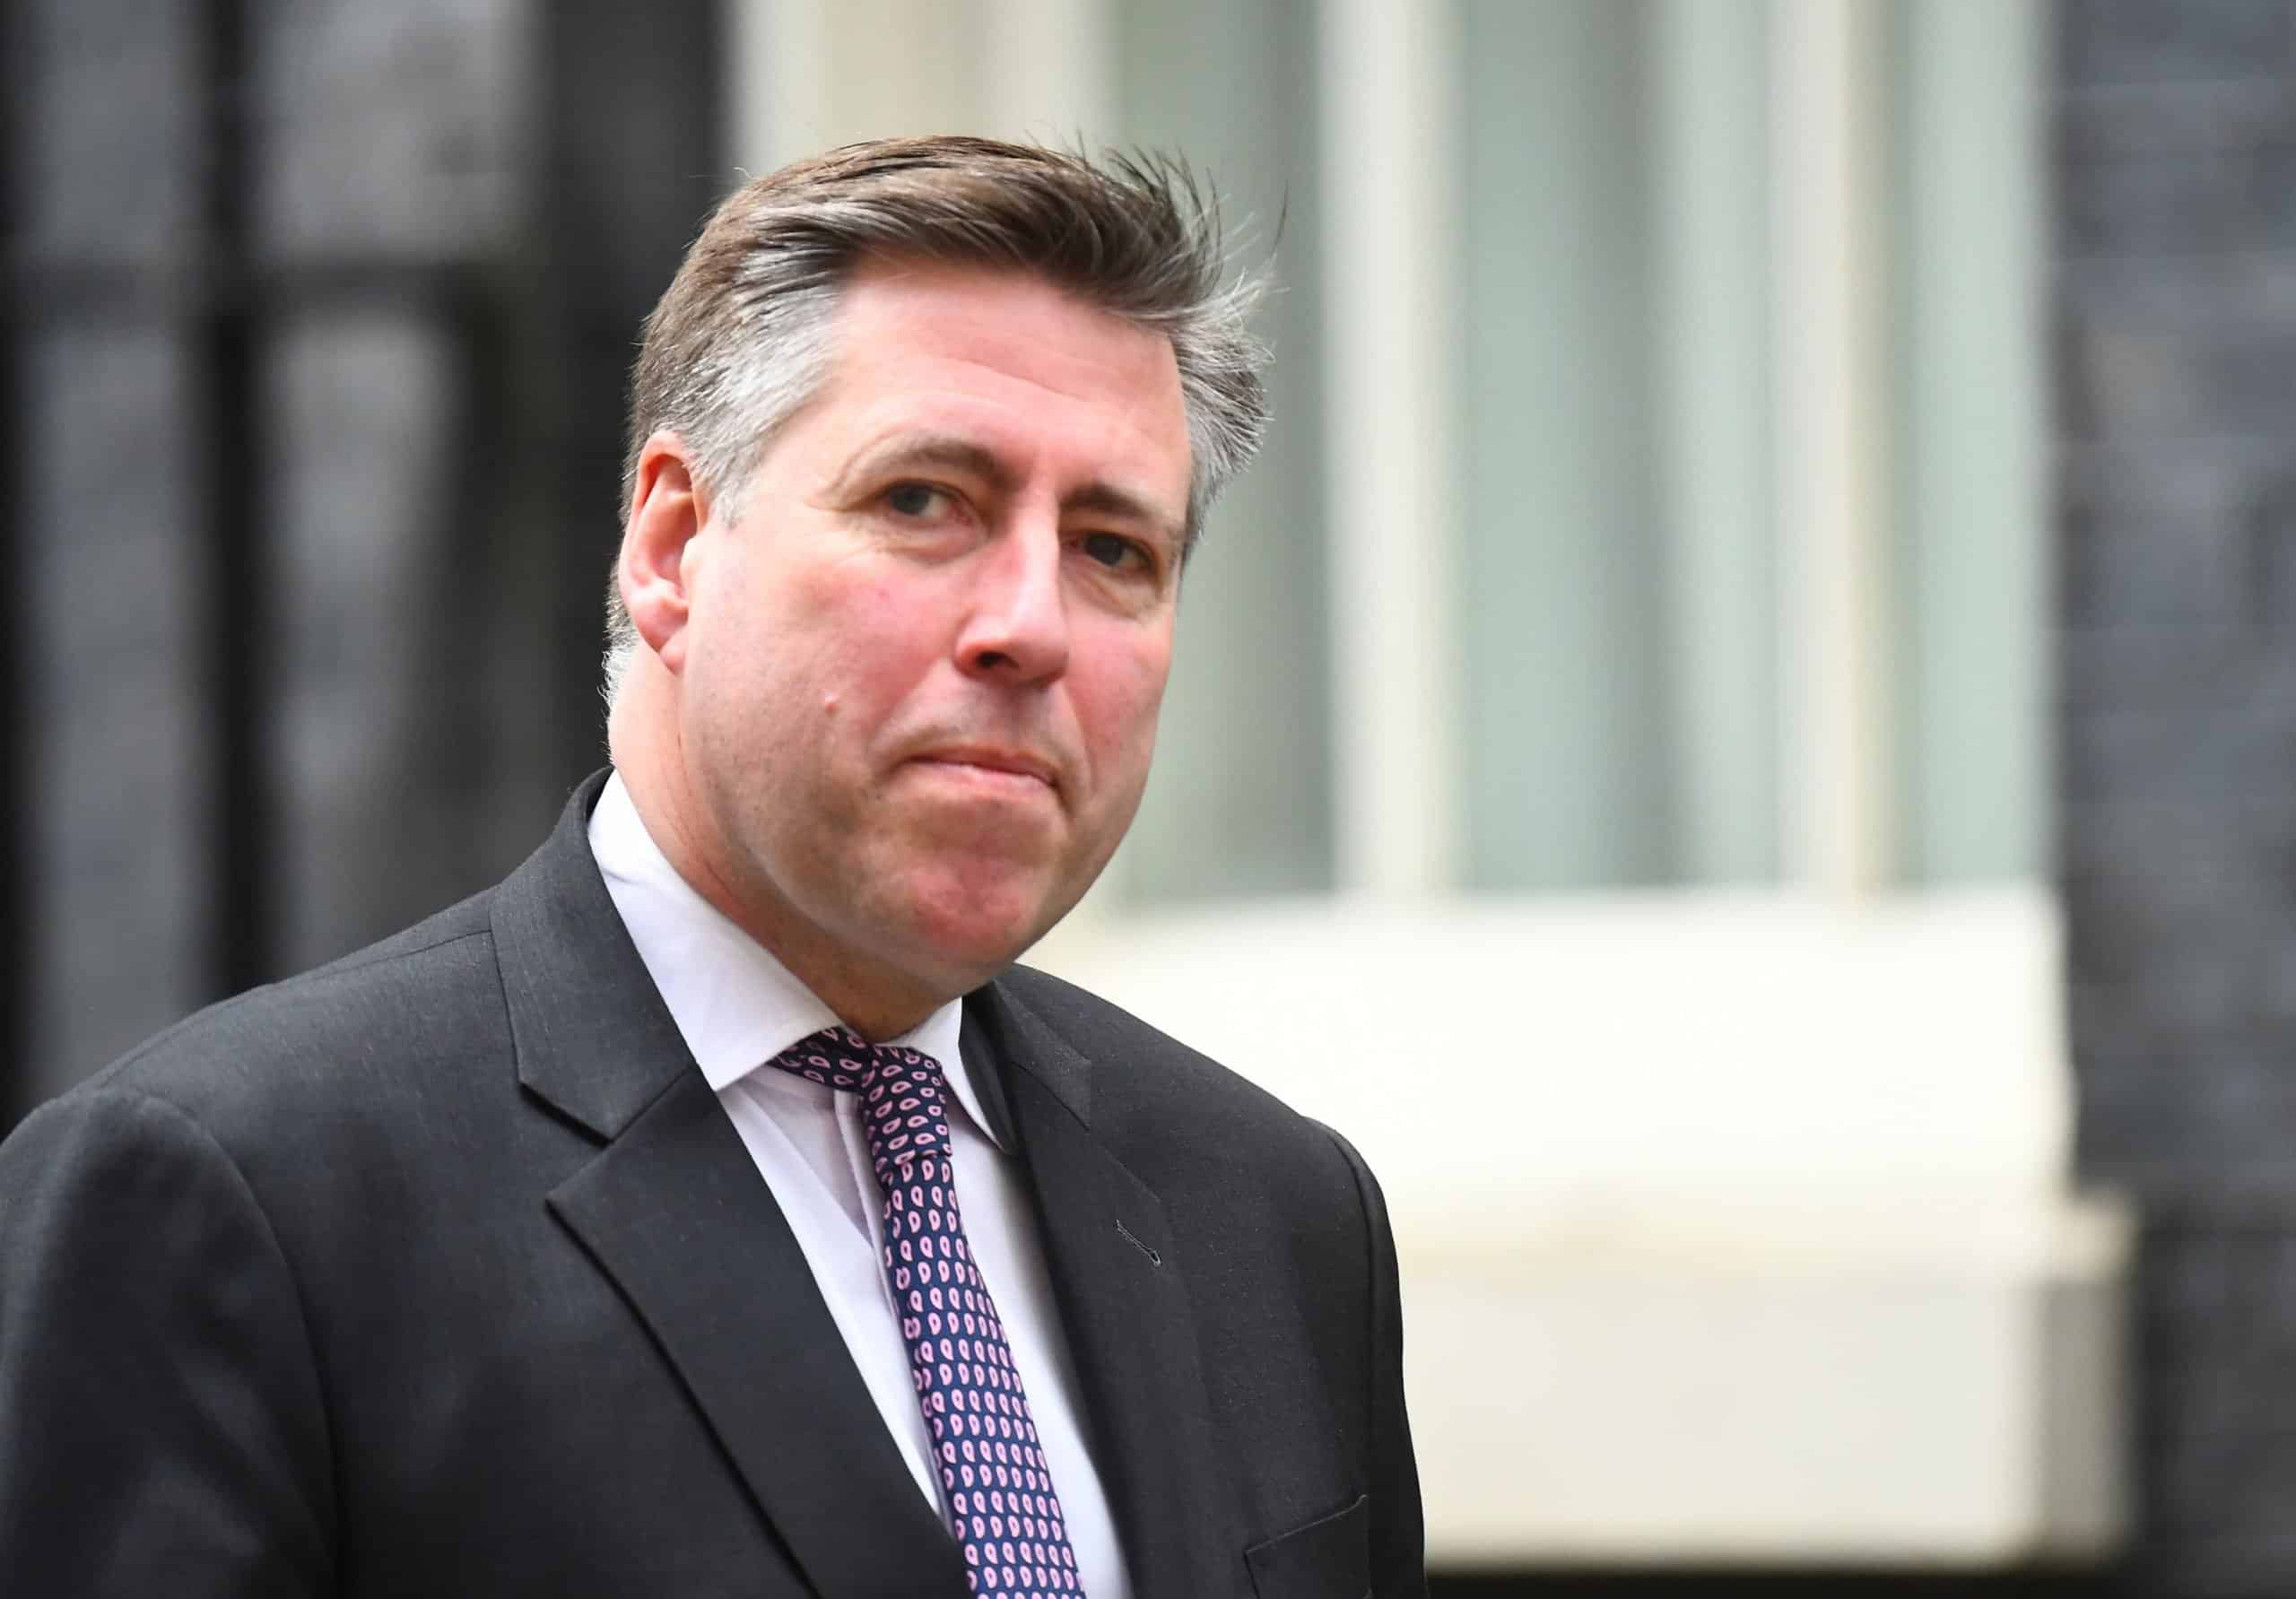 Sir Graham Brady boasts about ‘seniority’ and ability to bunk off from MP duties in fake interview